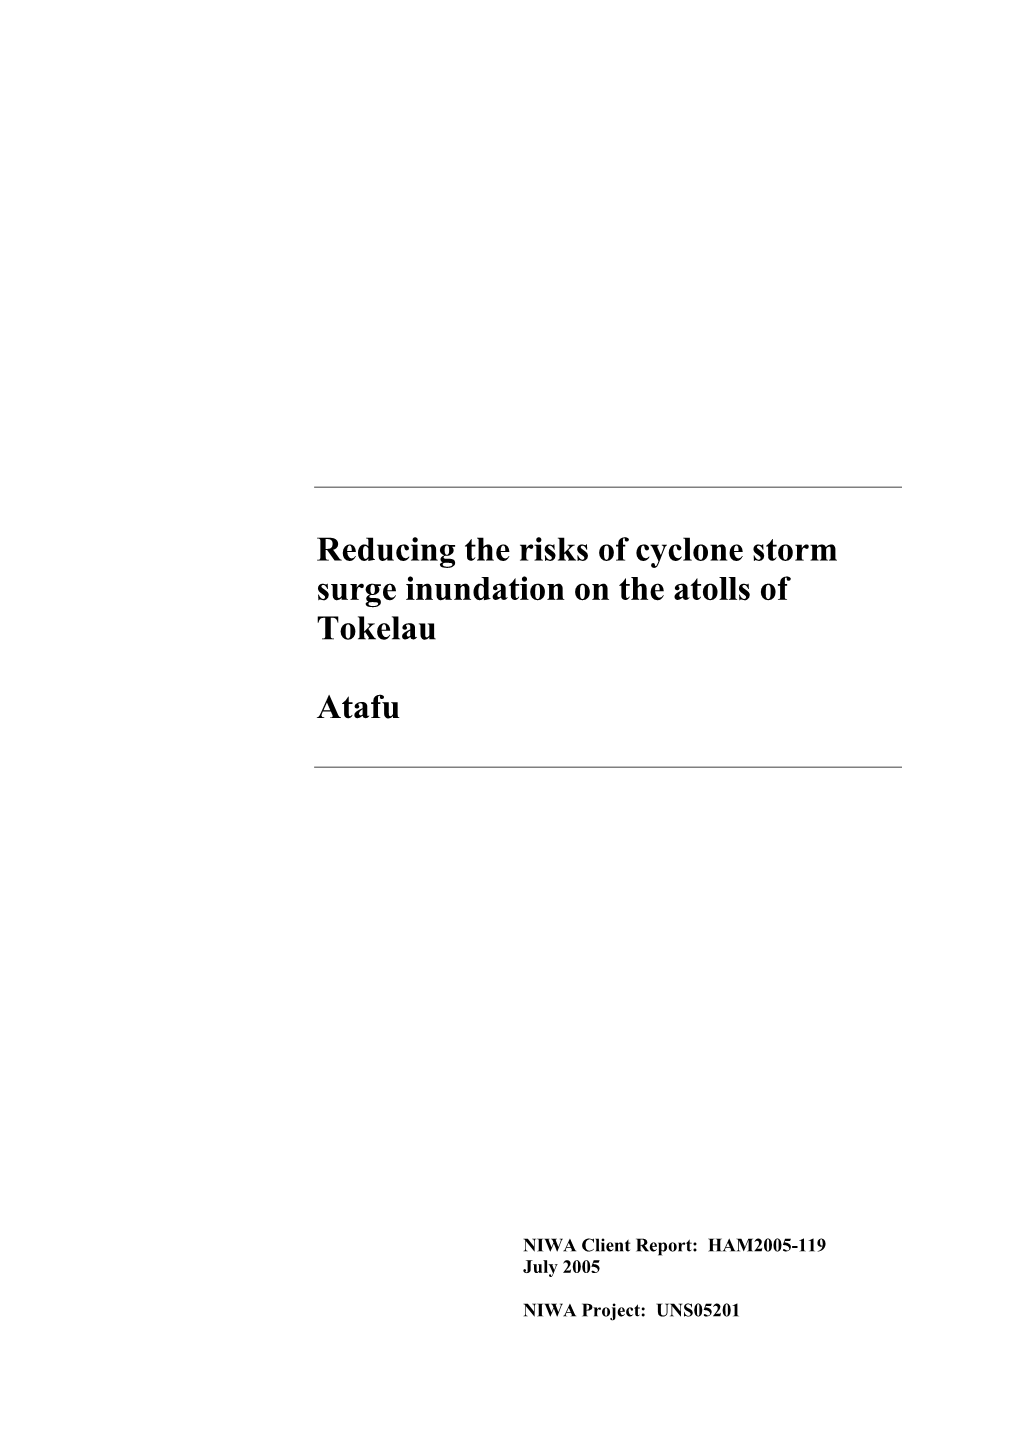 Reducing the Risks of Cyclone Storm Surge Inundation on the Atolls of Tokelau Atafu